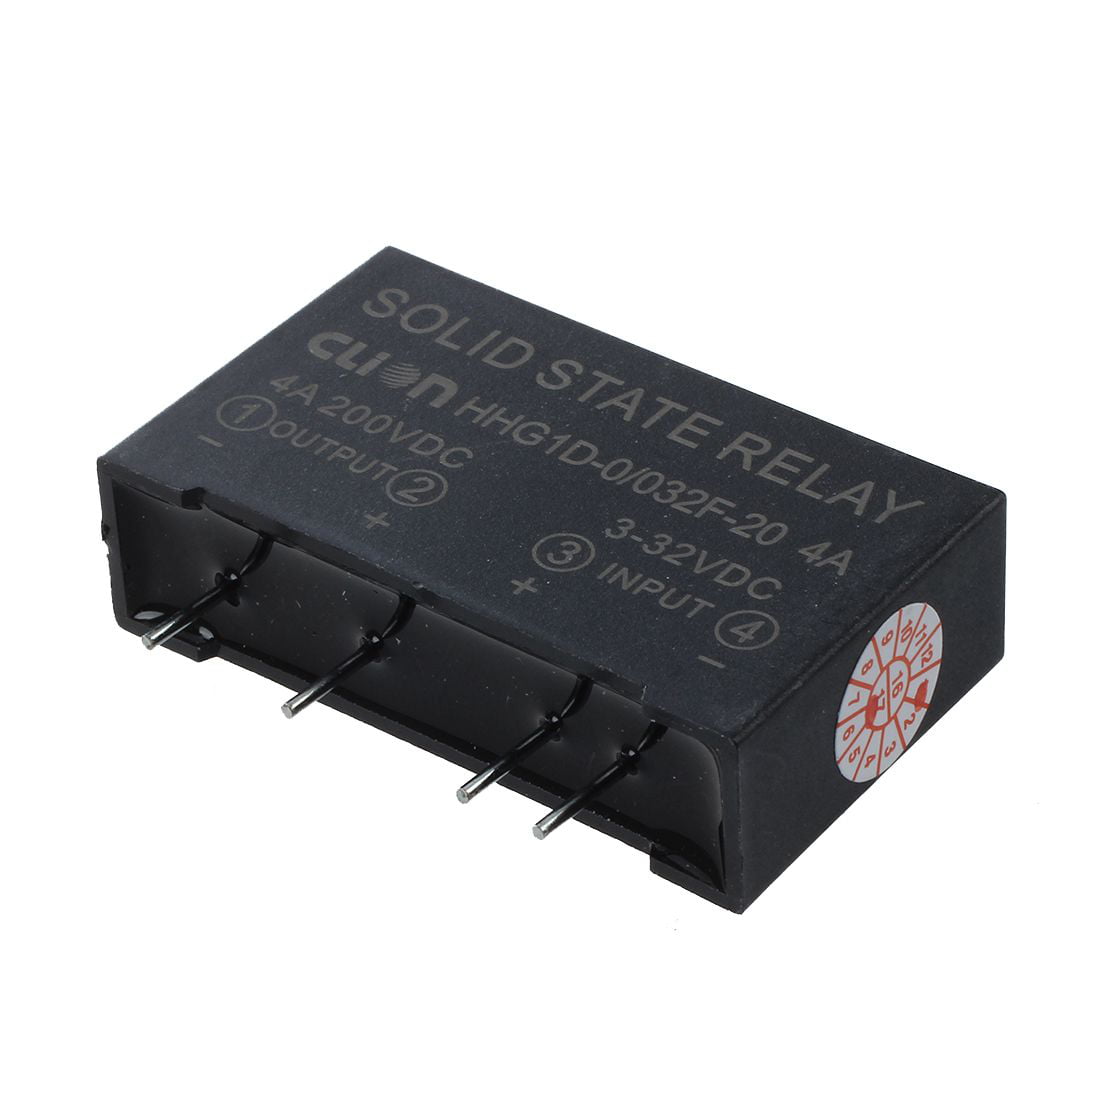 Hot Input 3-32V DC Output 4A 200V 4 Pin PCB Solid State Relay 